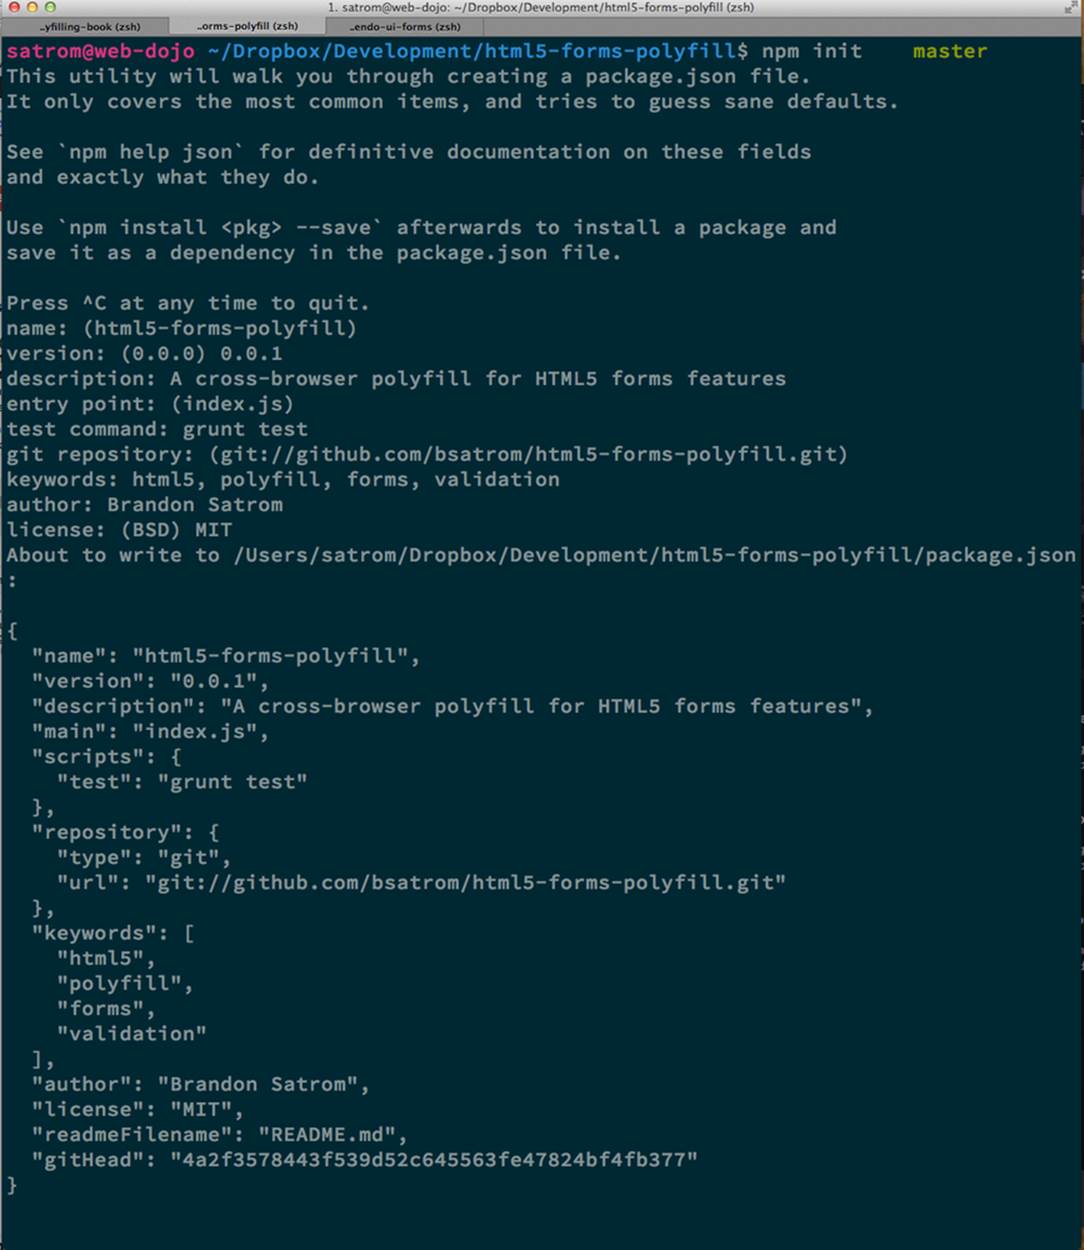 Running npm init to configure your package.json file